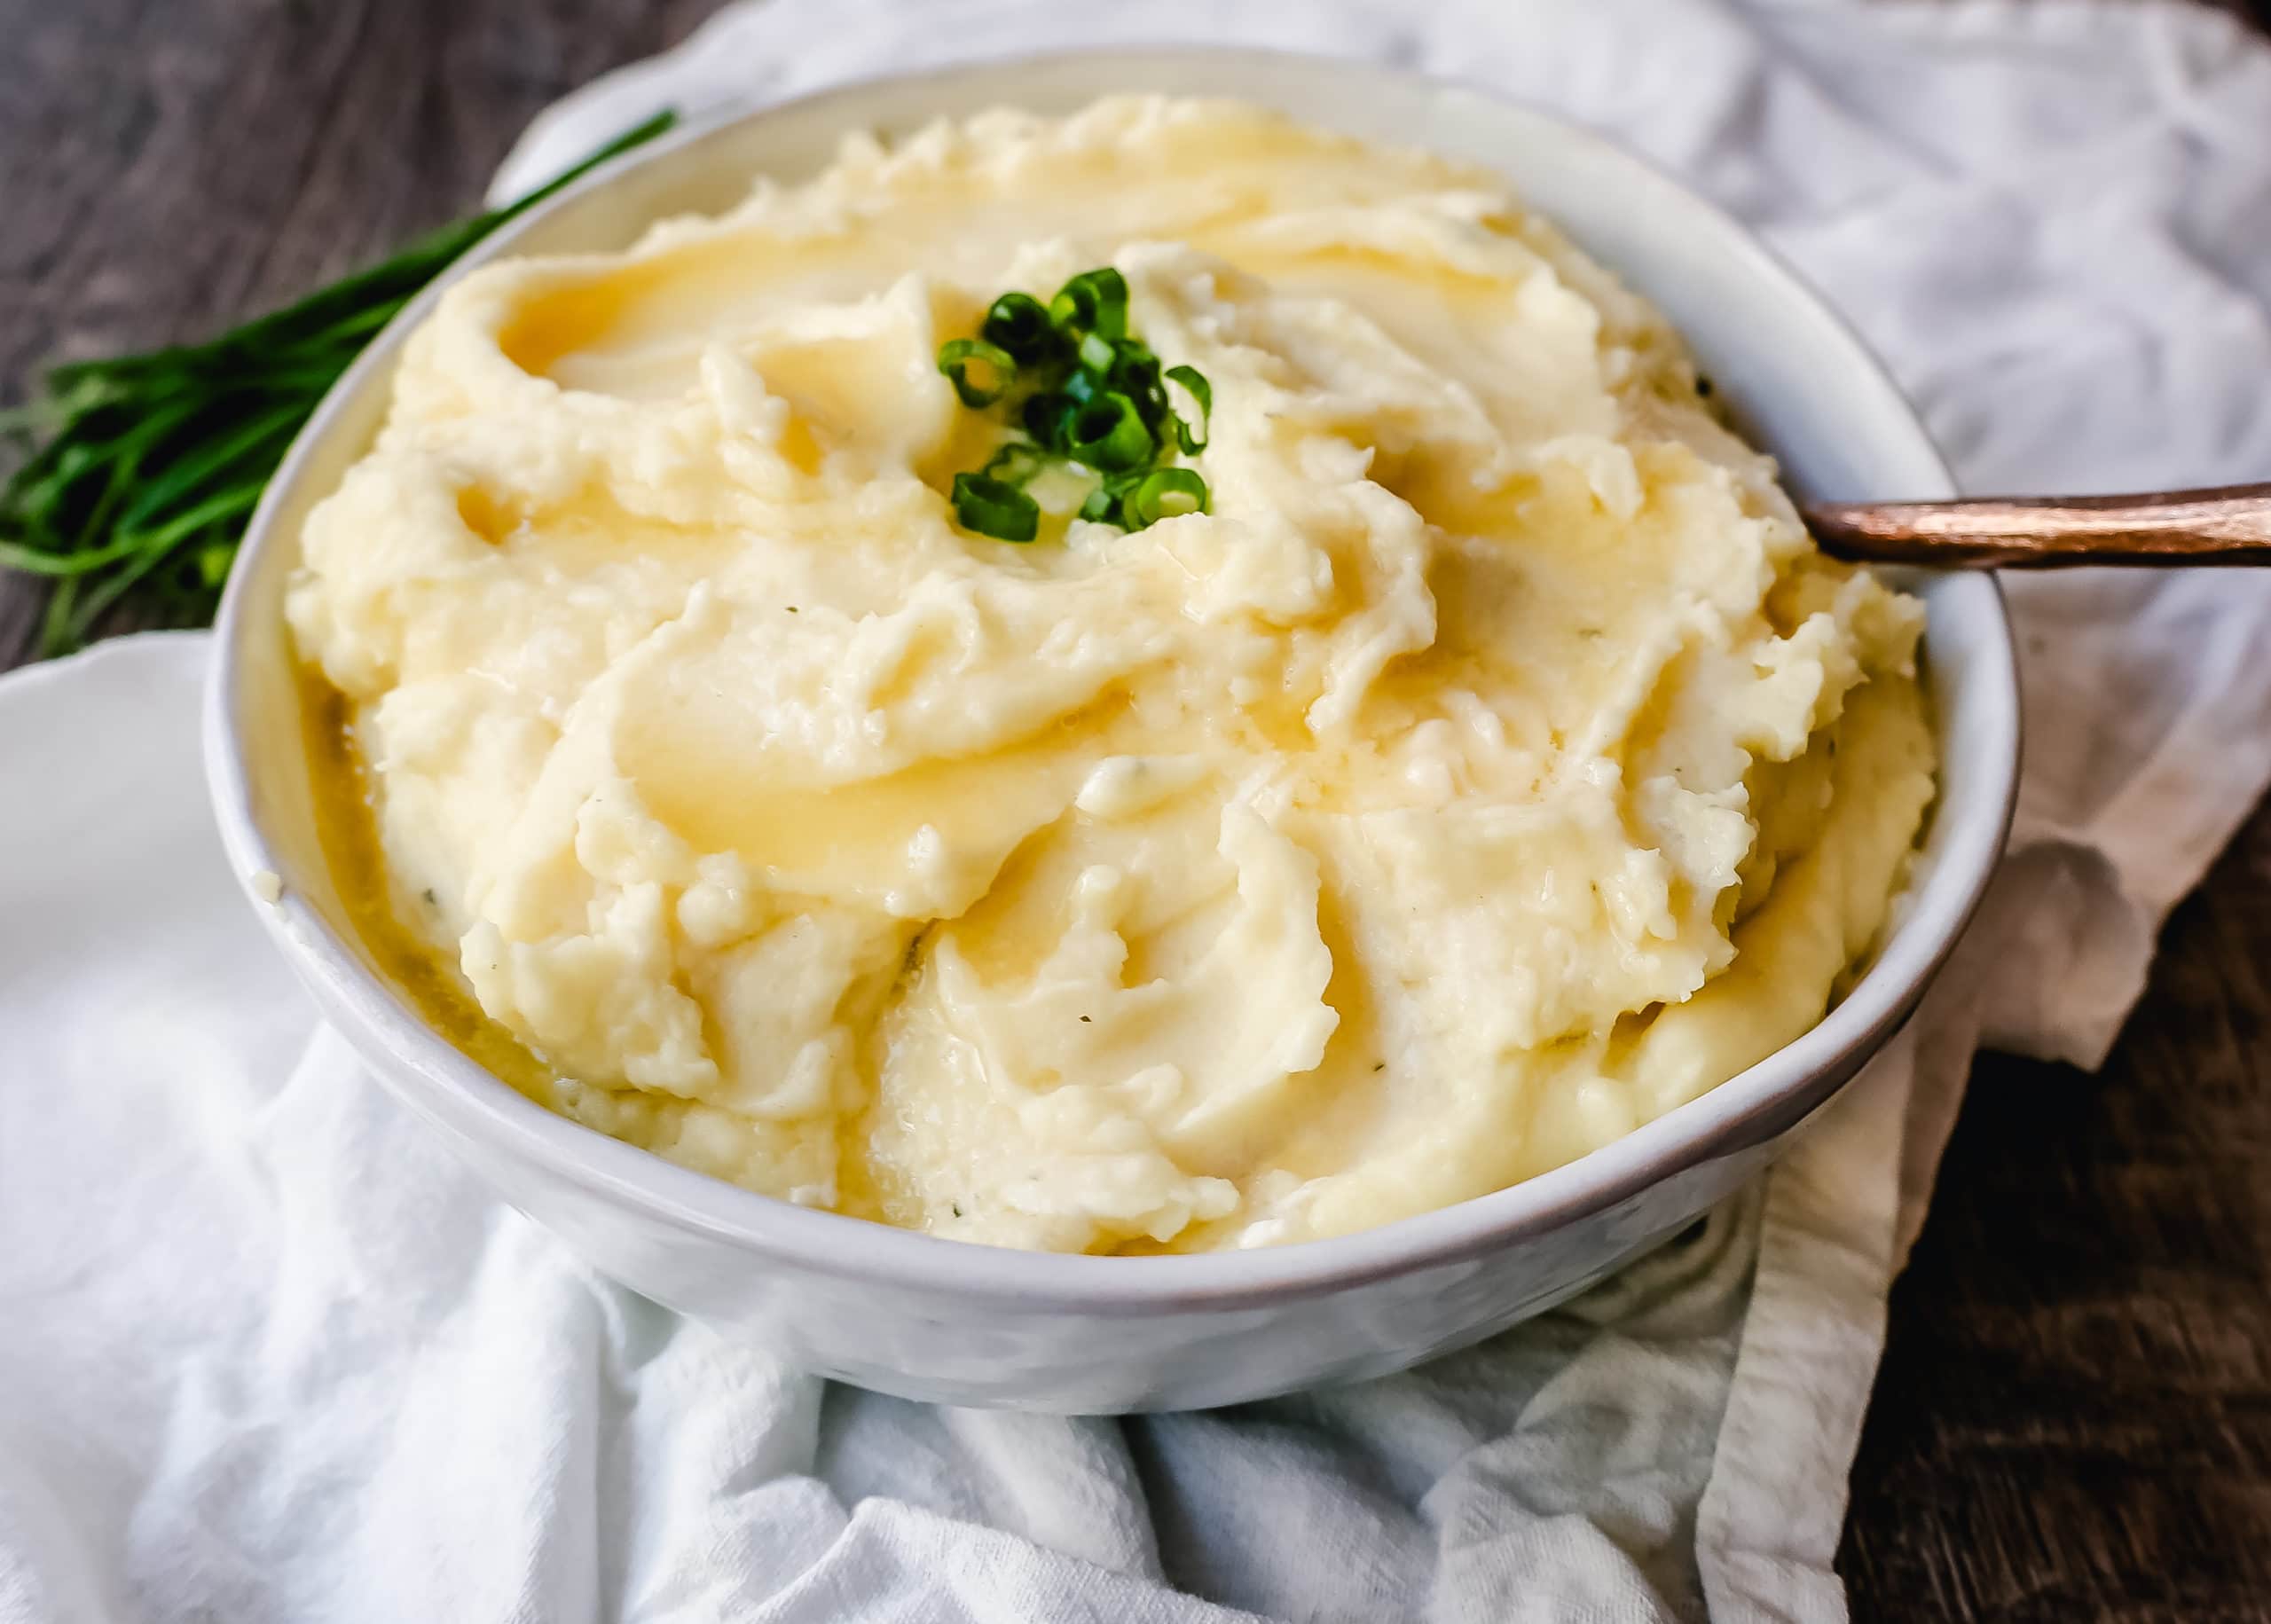 Boursin Cheese Creamy Mashed Potatoes Buttery, creamy homemade mashed potatoes with garlic and herb Boursin cheese. So flavorful, you don't even need the gravy!